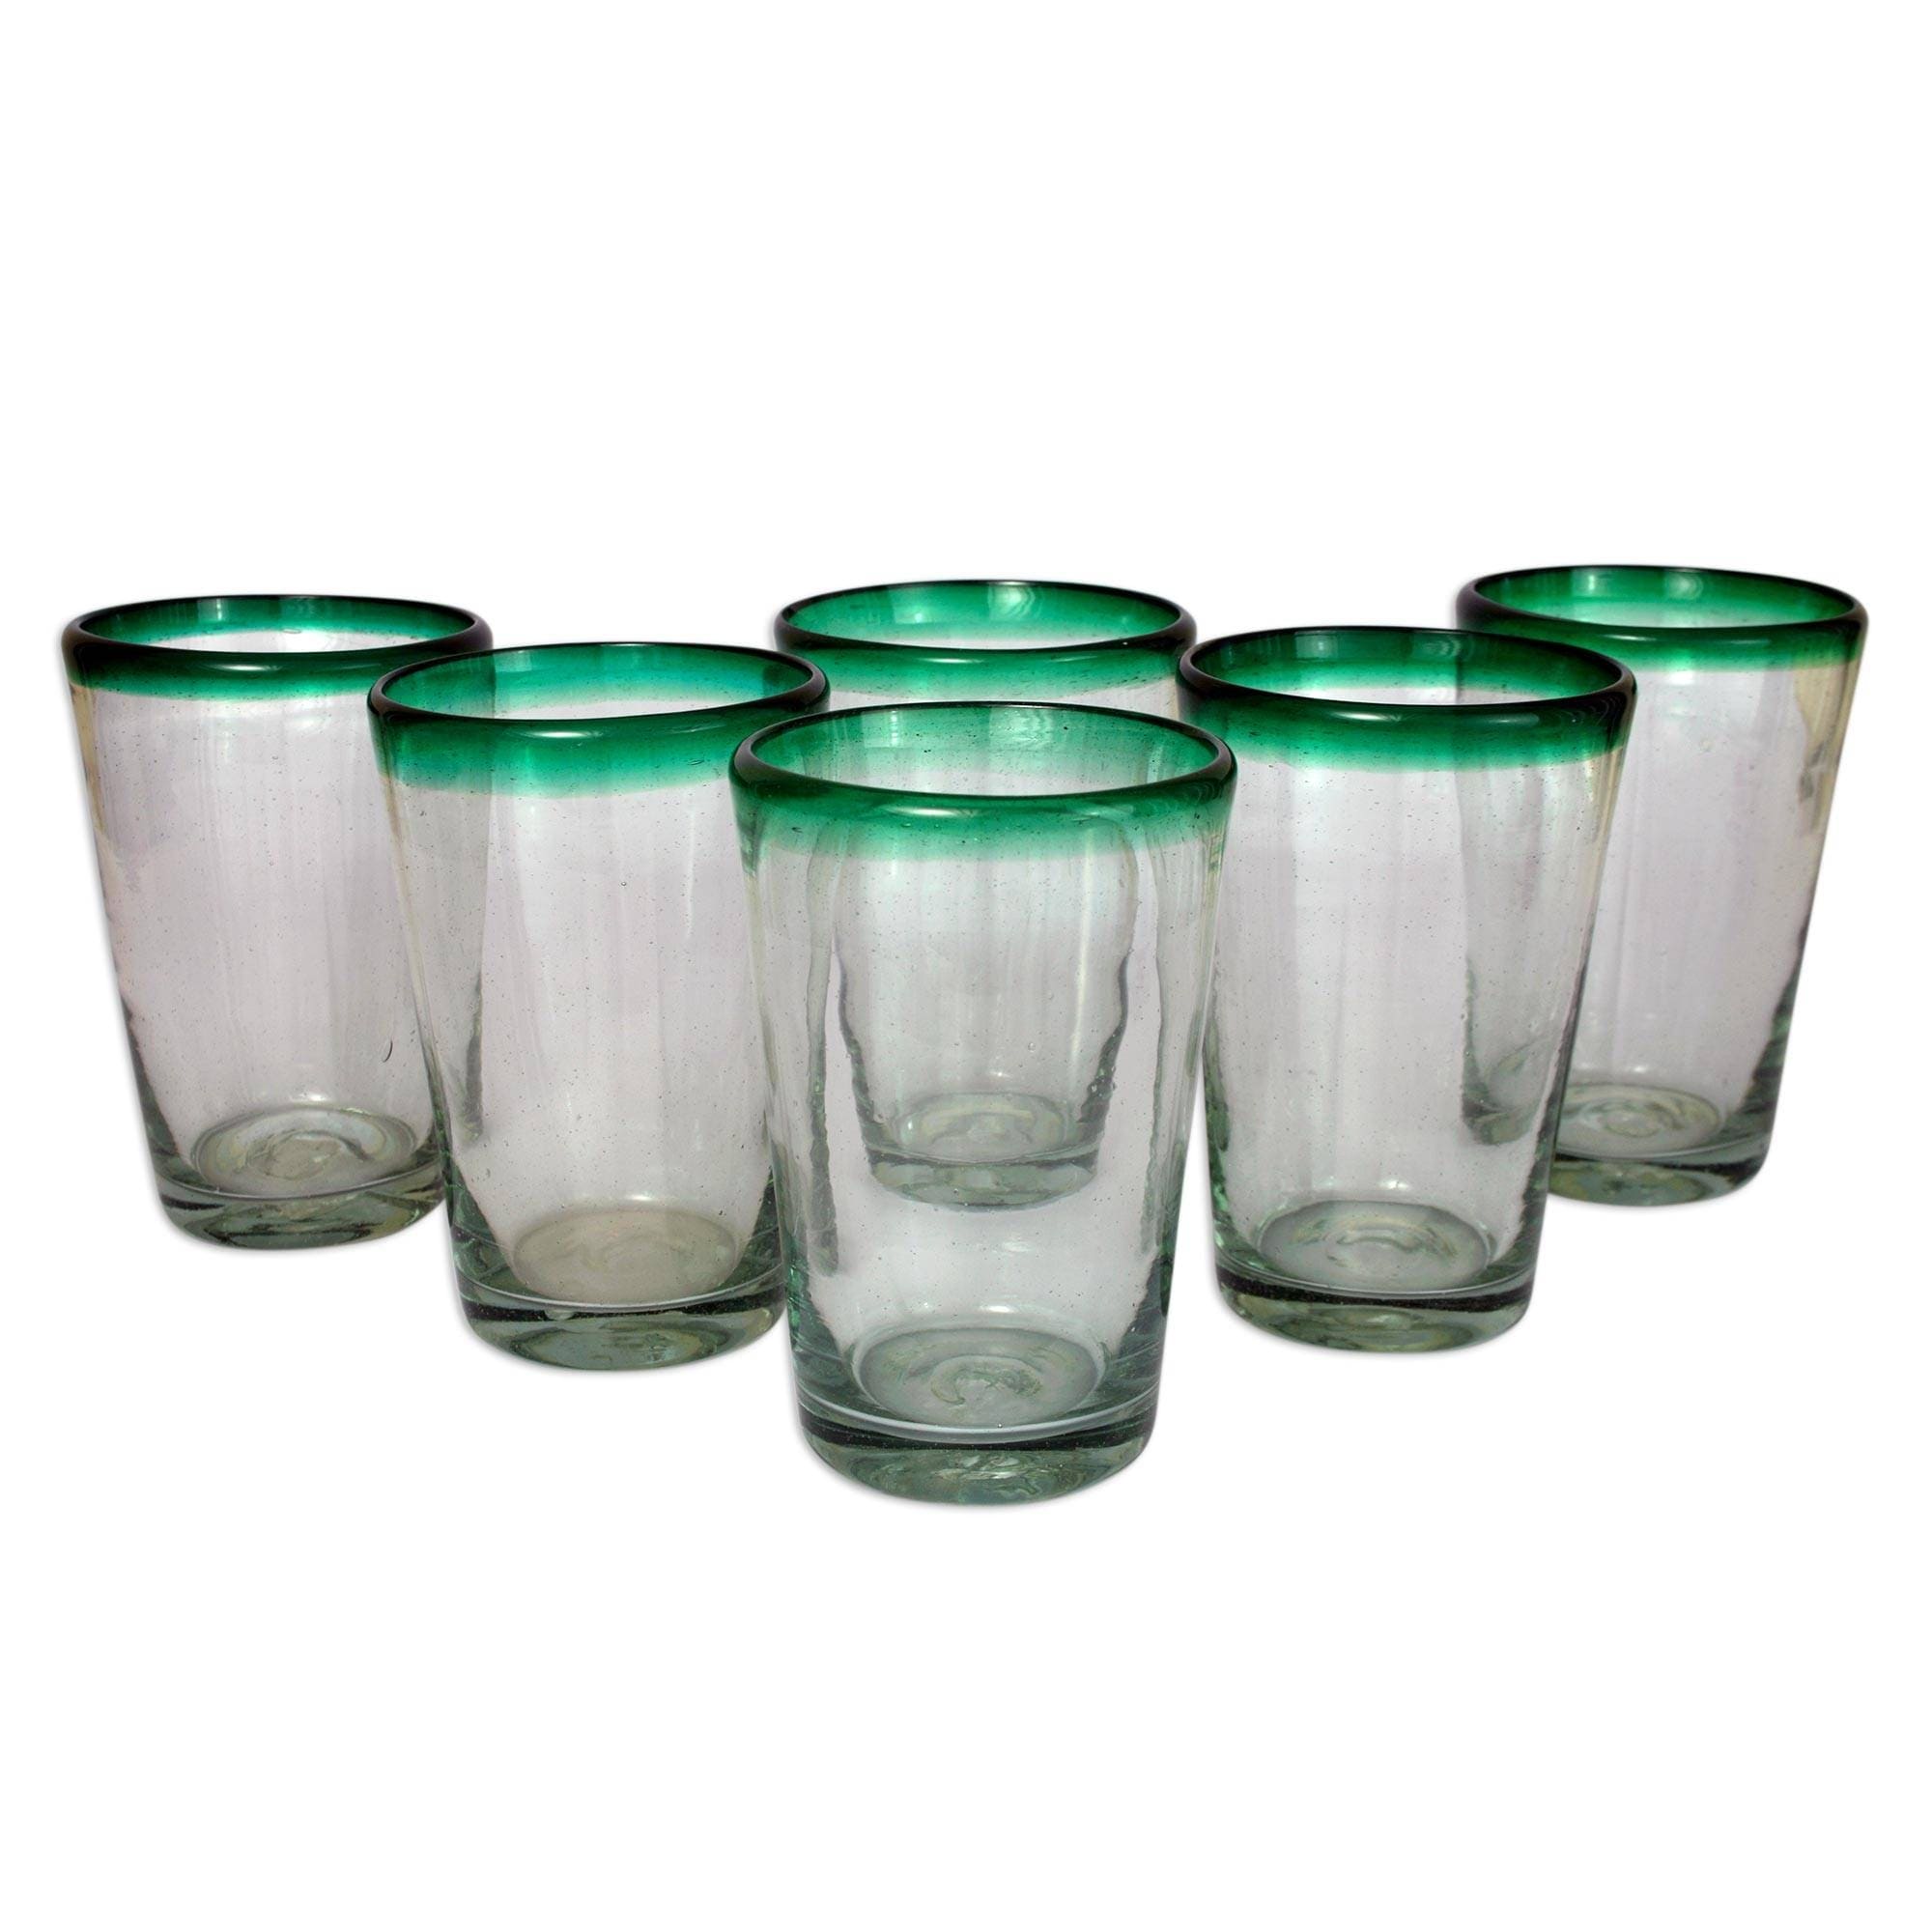 https://ak1.ostkcdn.com/images/products/is/images/direct/f0703f928840ea8481970bb6f93ca5f2cd0a4931/Handmade-Blown-Green-Rim-Conical-Drinking-Glasses-Set-of-6-%28MEXICO%29.jpg